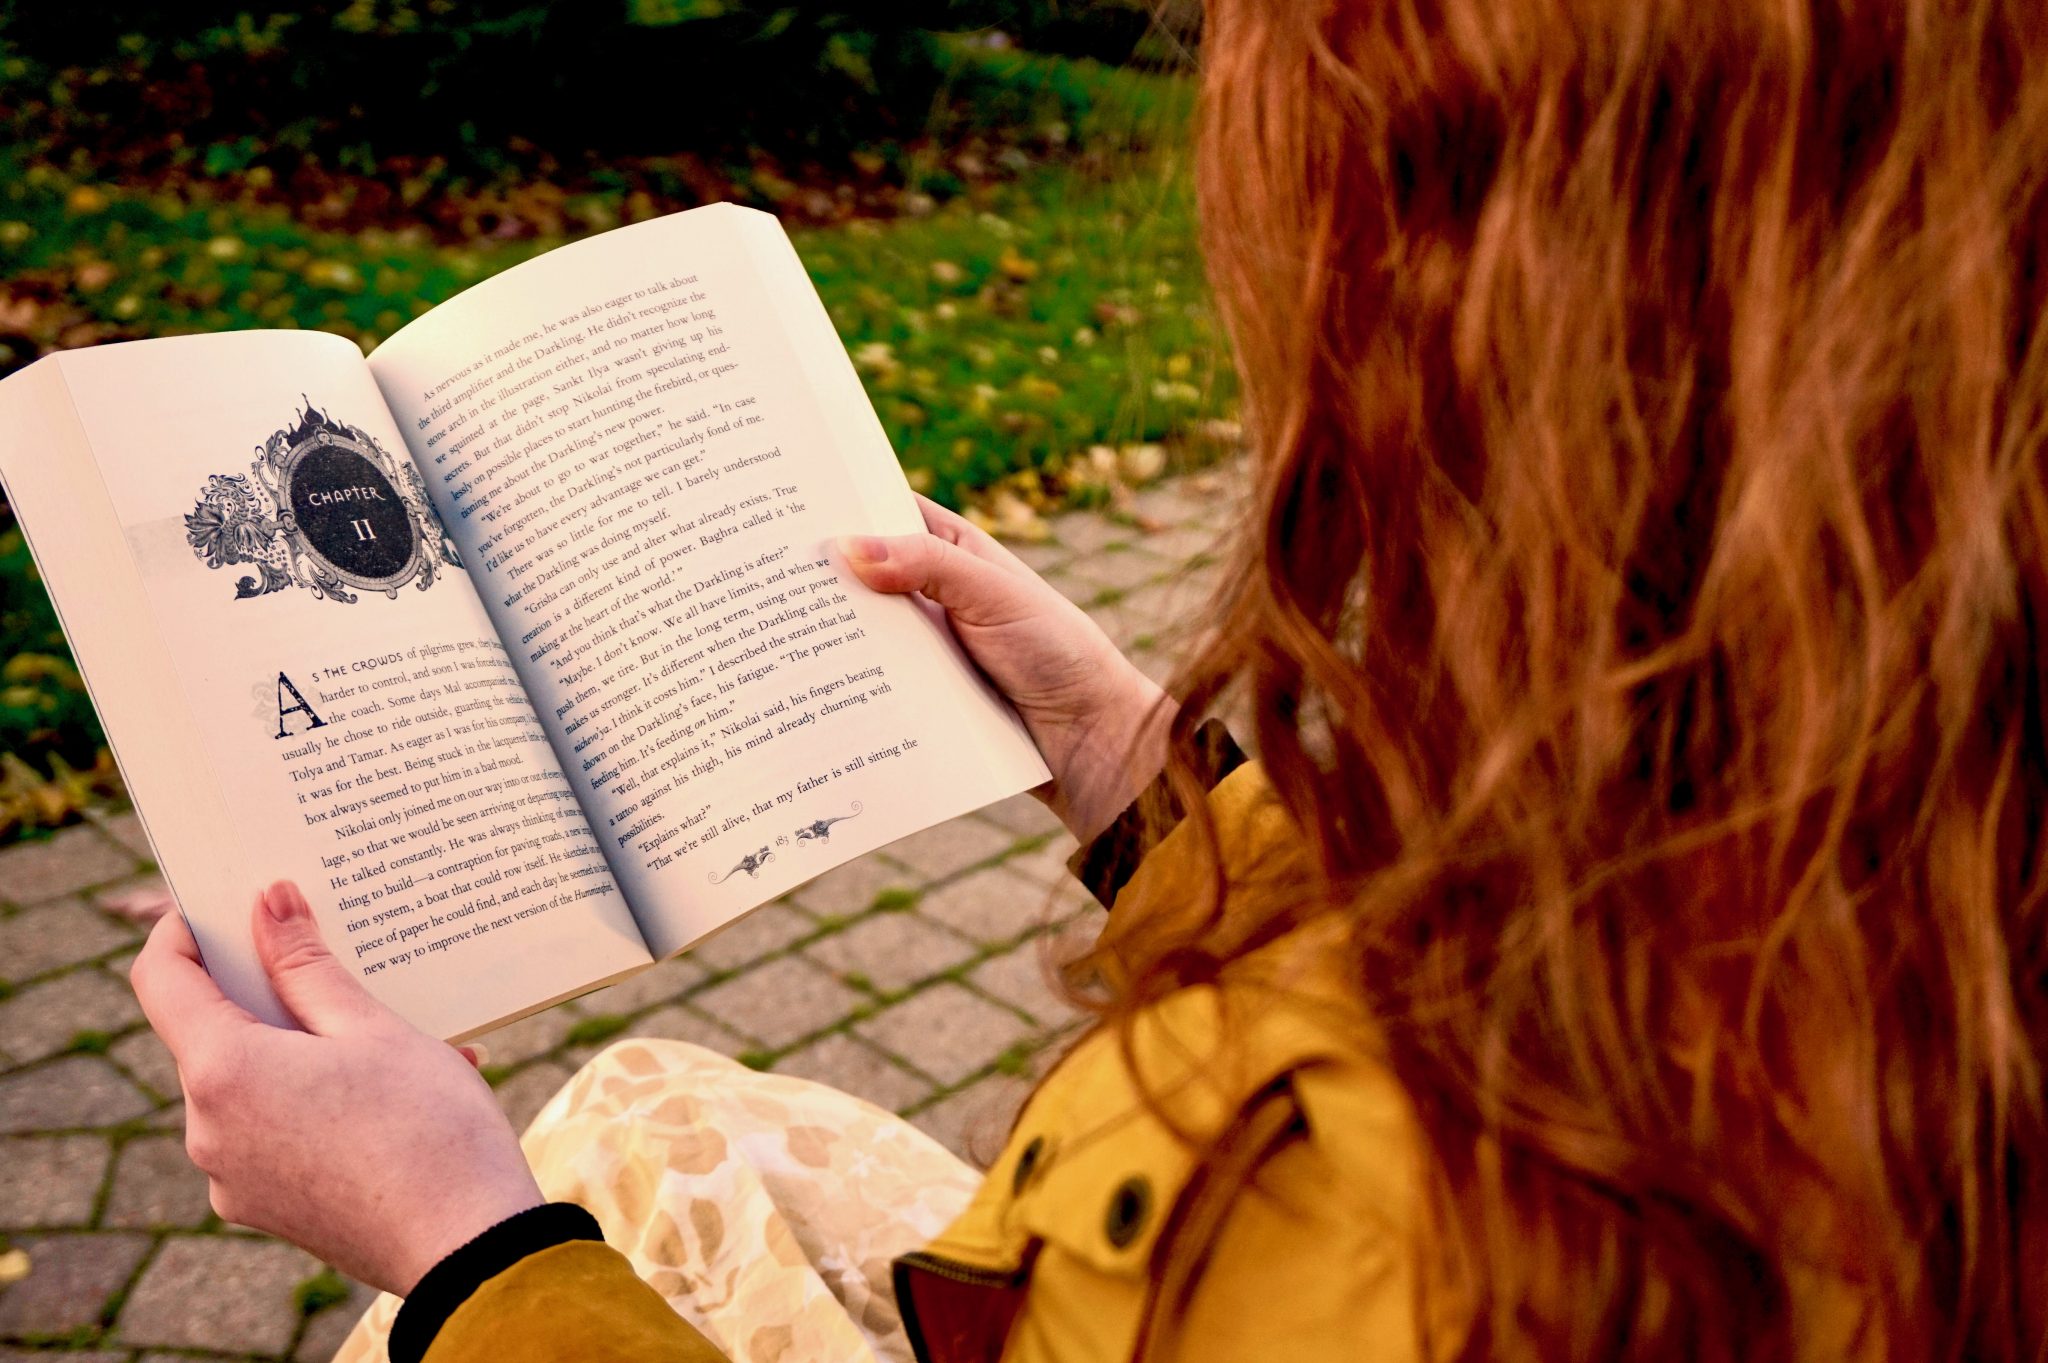 A girl with long red hair reading a novel.